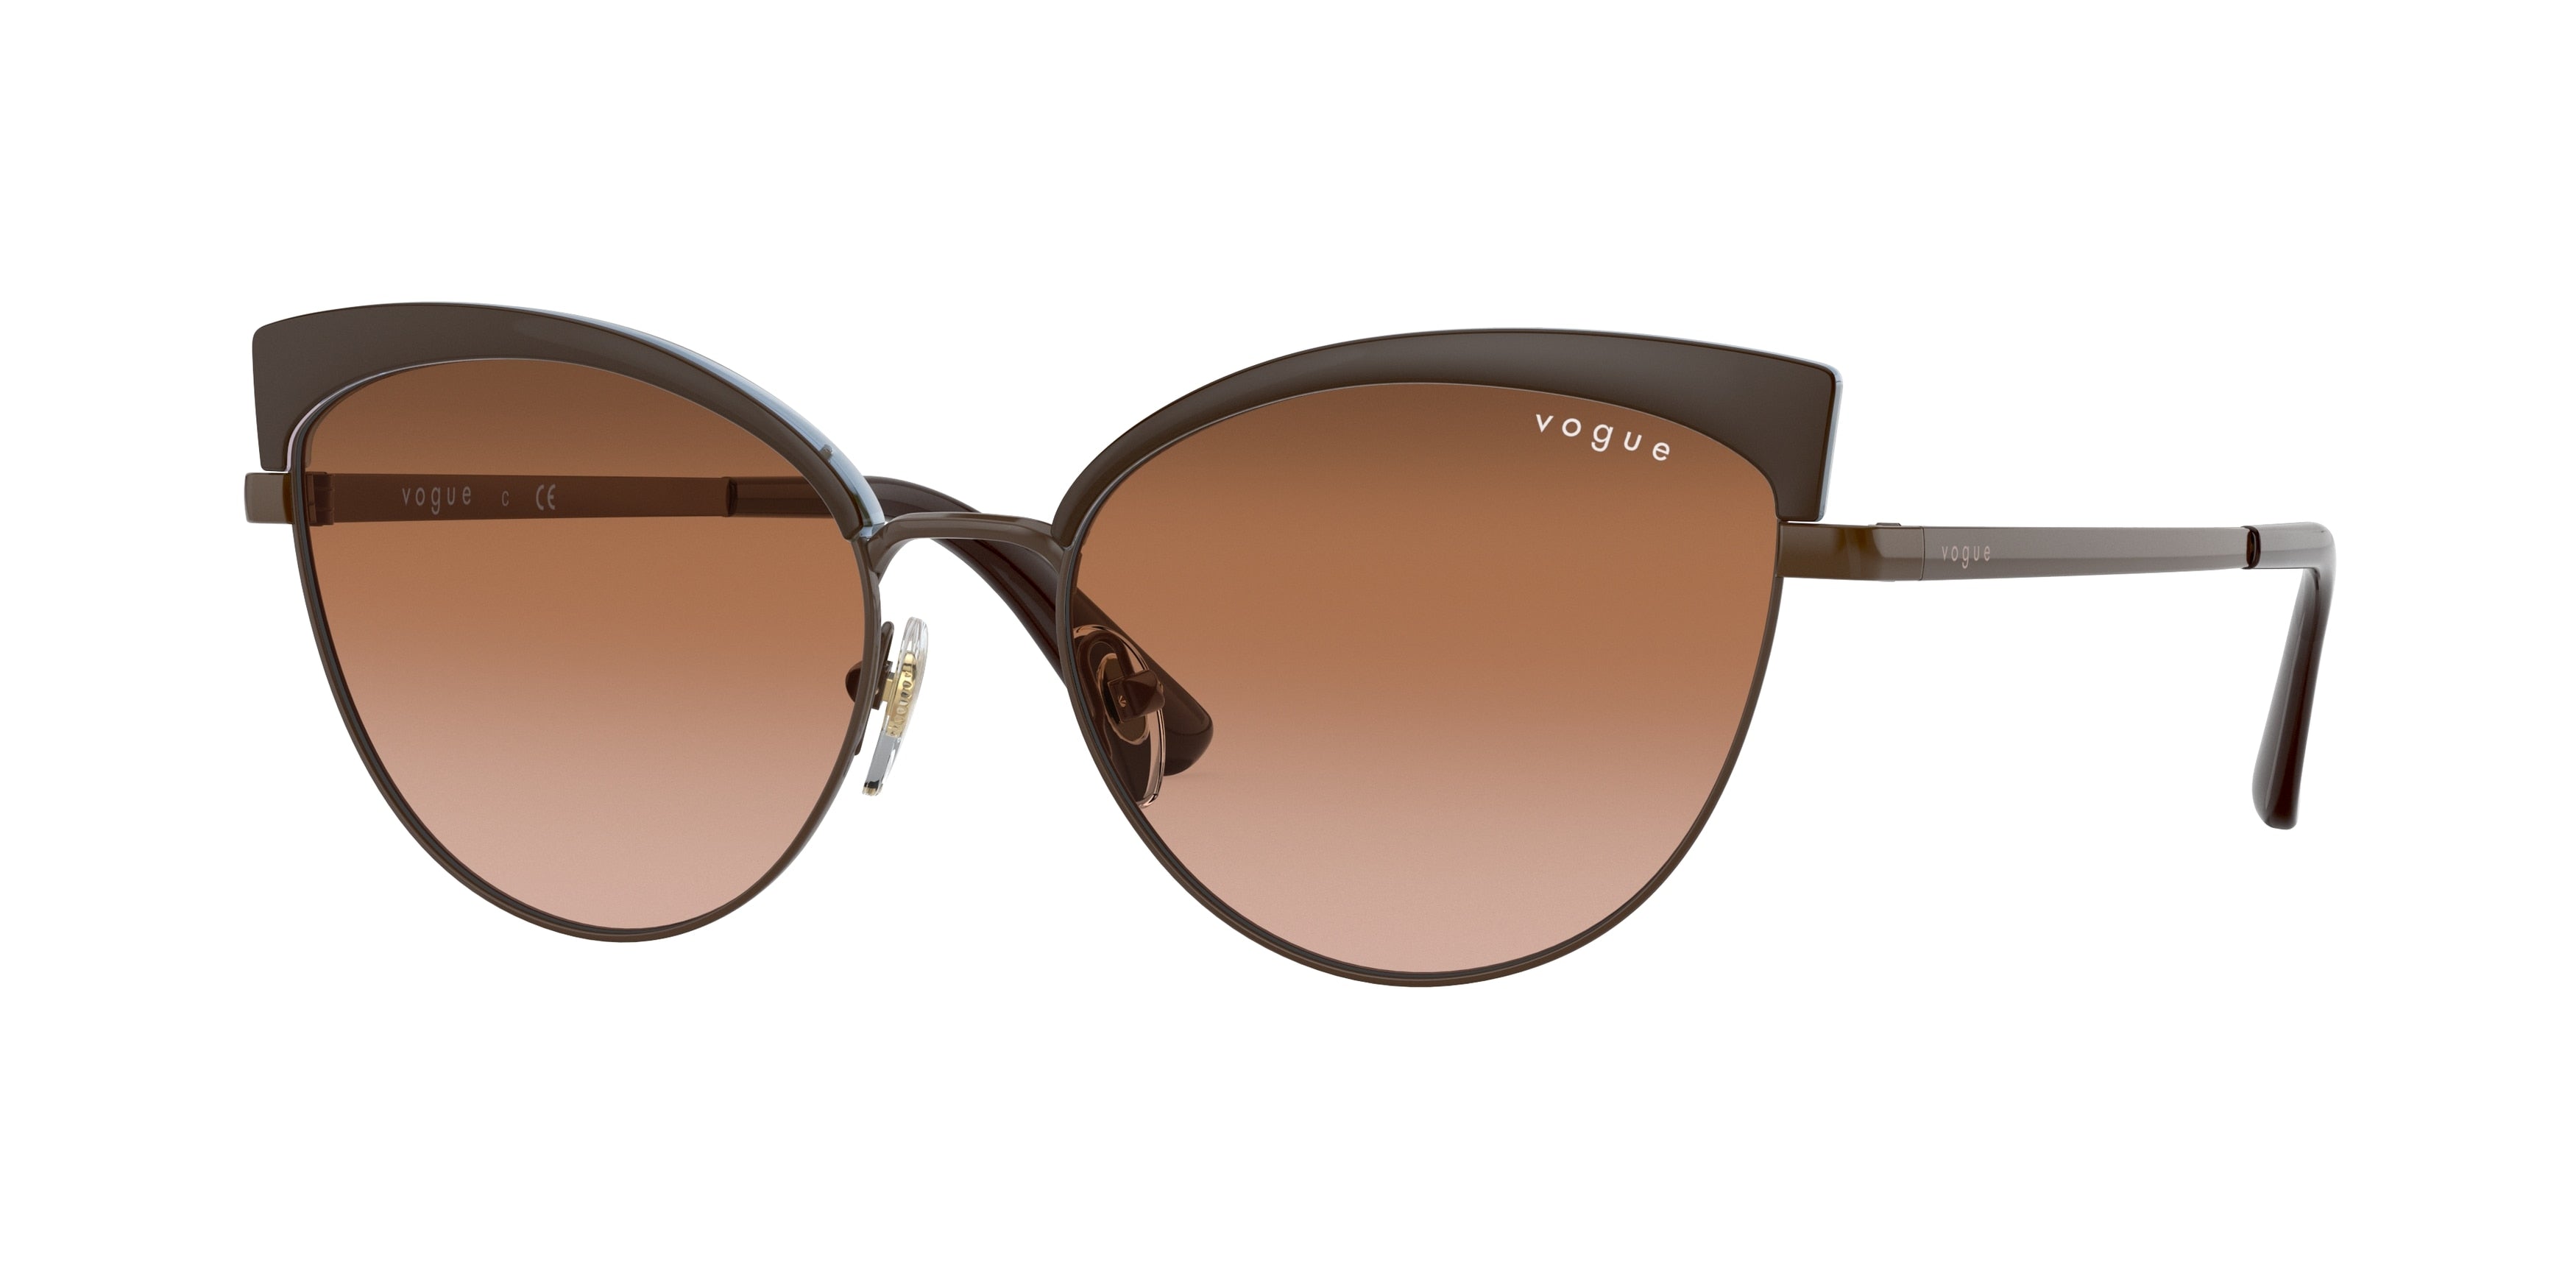 Vogue VO4188S Butterfly Sunglasses  514313-Brown 55-135-16 - Color Map Brown